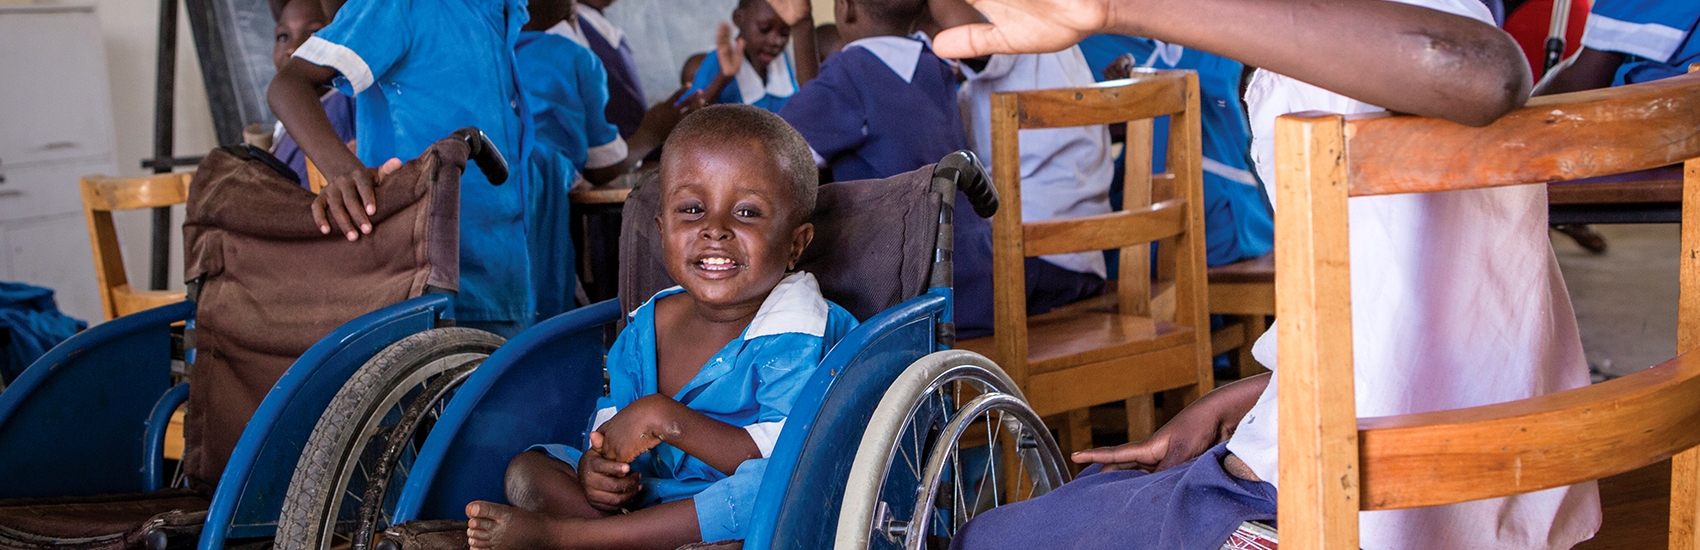 A young boy from Kenya sits in a wheelchair